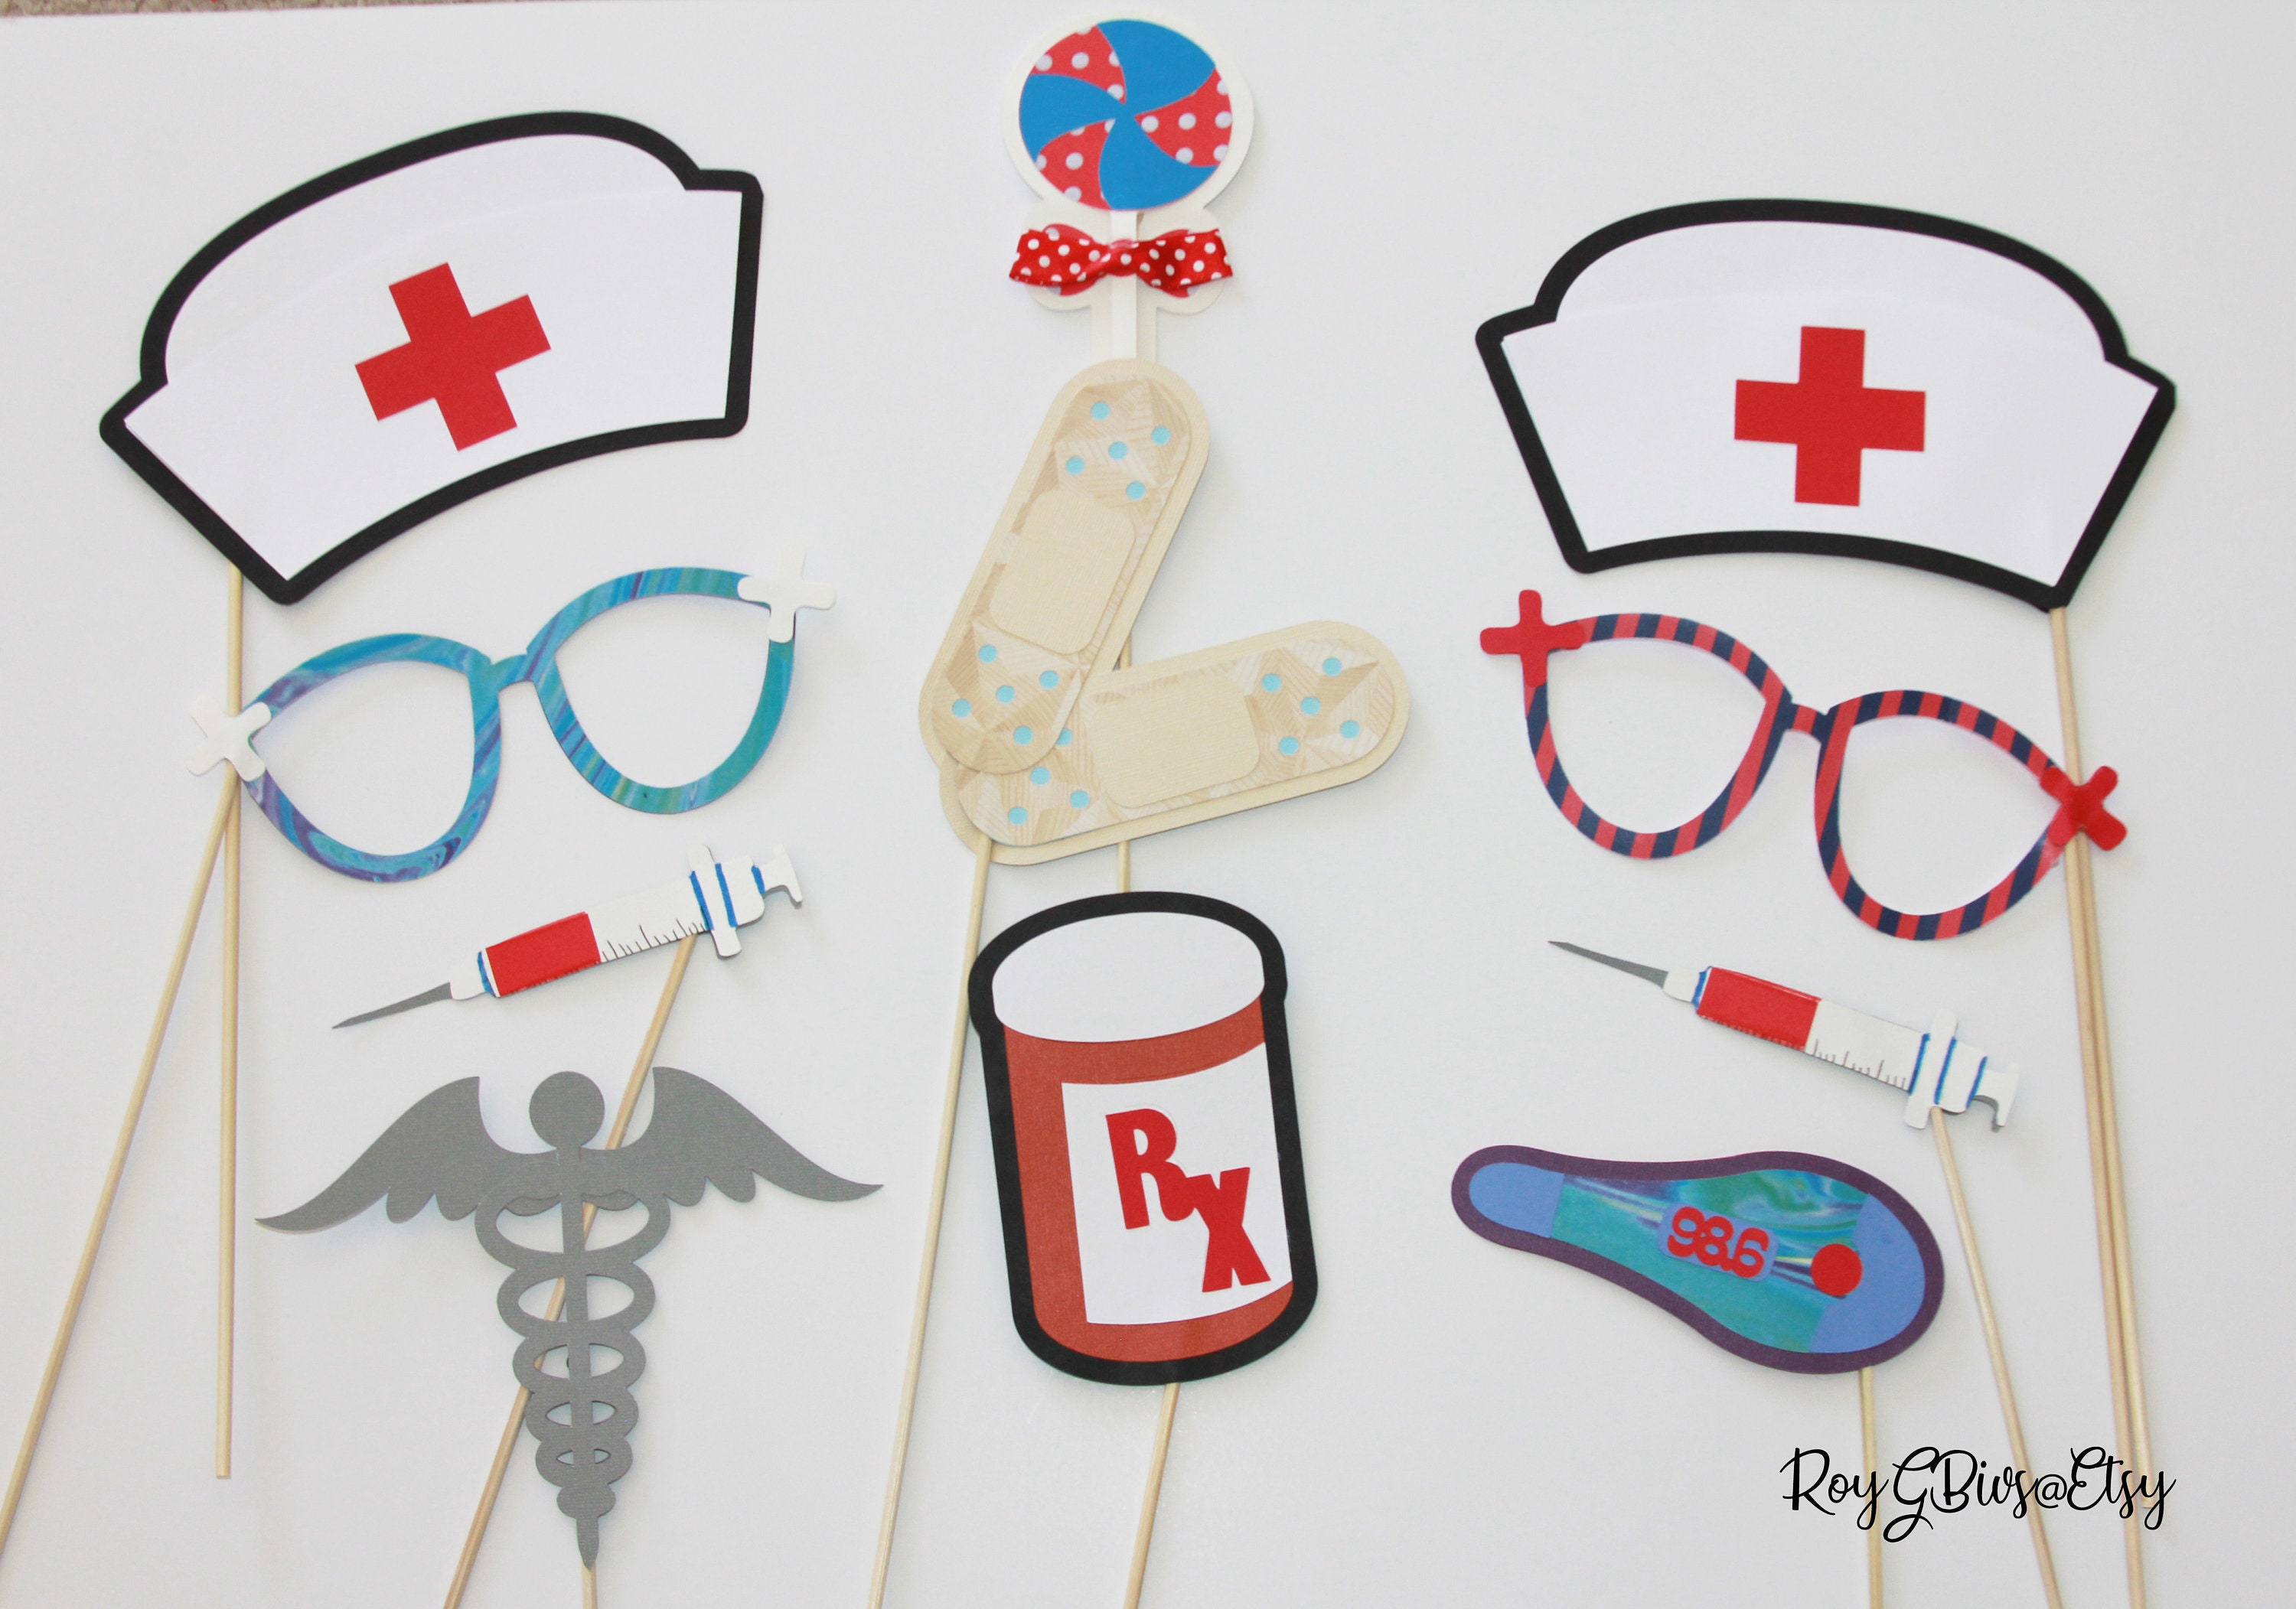 Show Your Love: Window Signs & Photo Props for Nurses Week